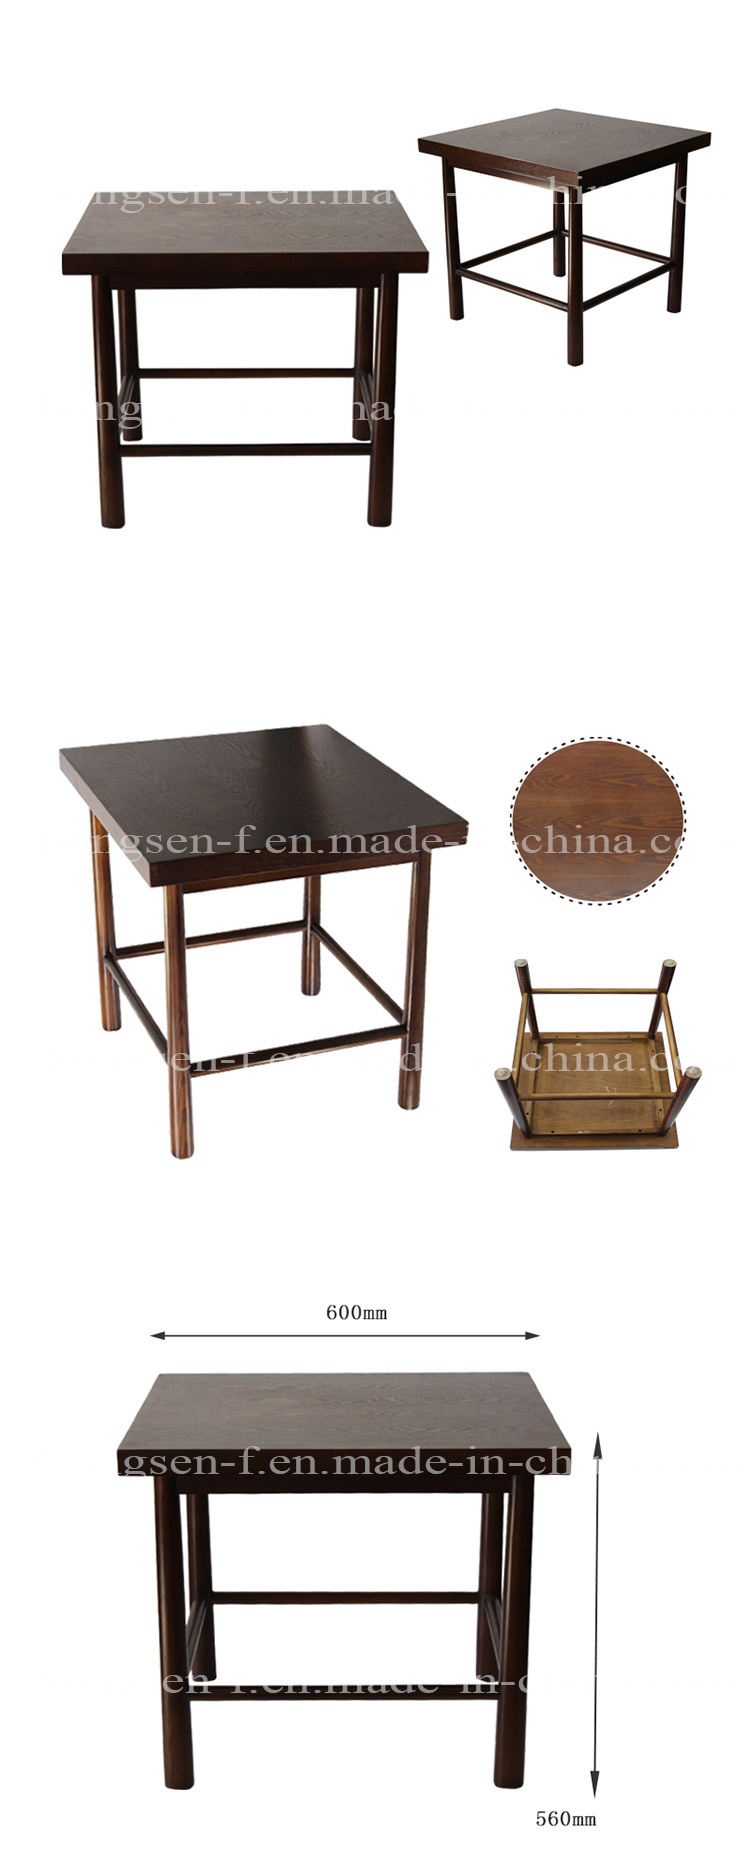 Solid Wood Furniture Square Table Dining Table Used on Cafe Coffee Shop